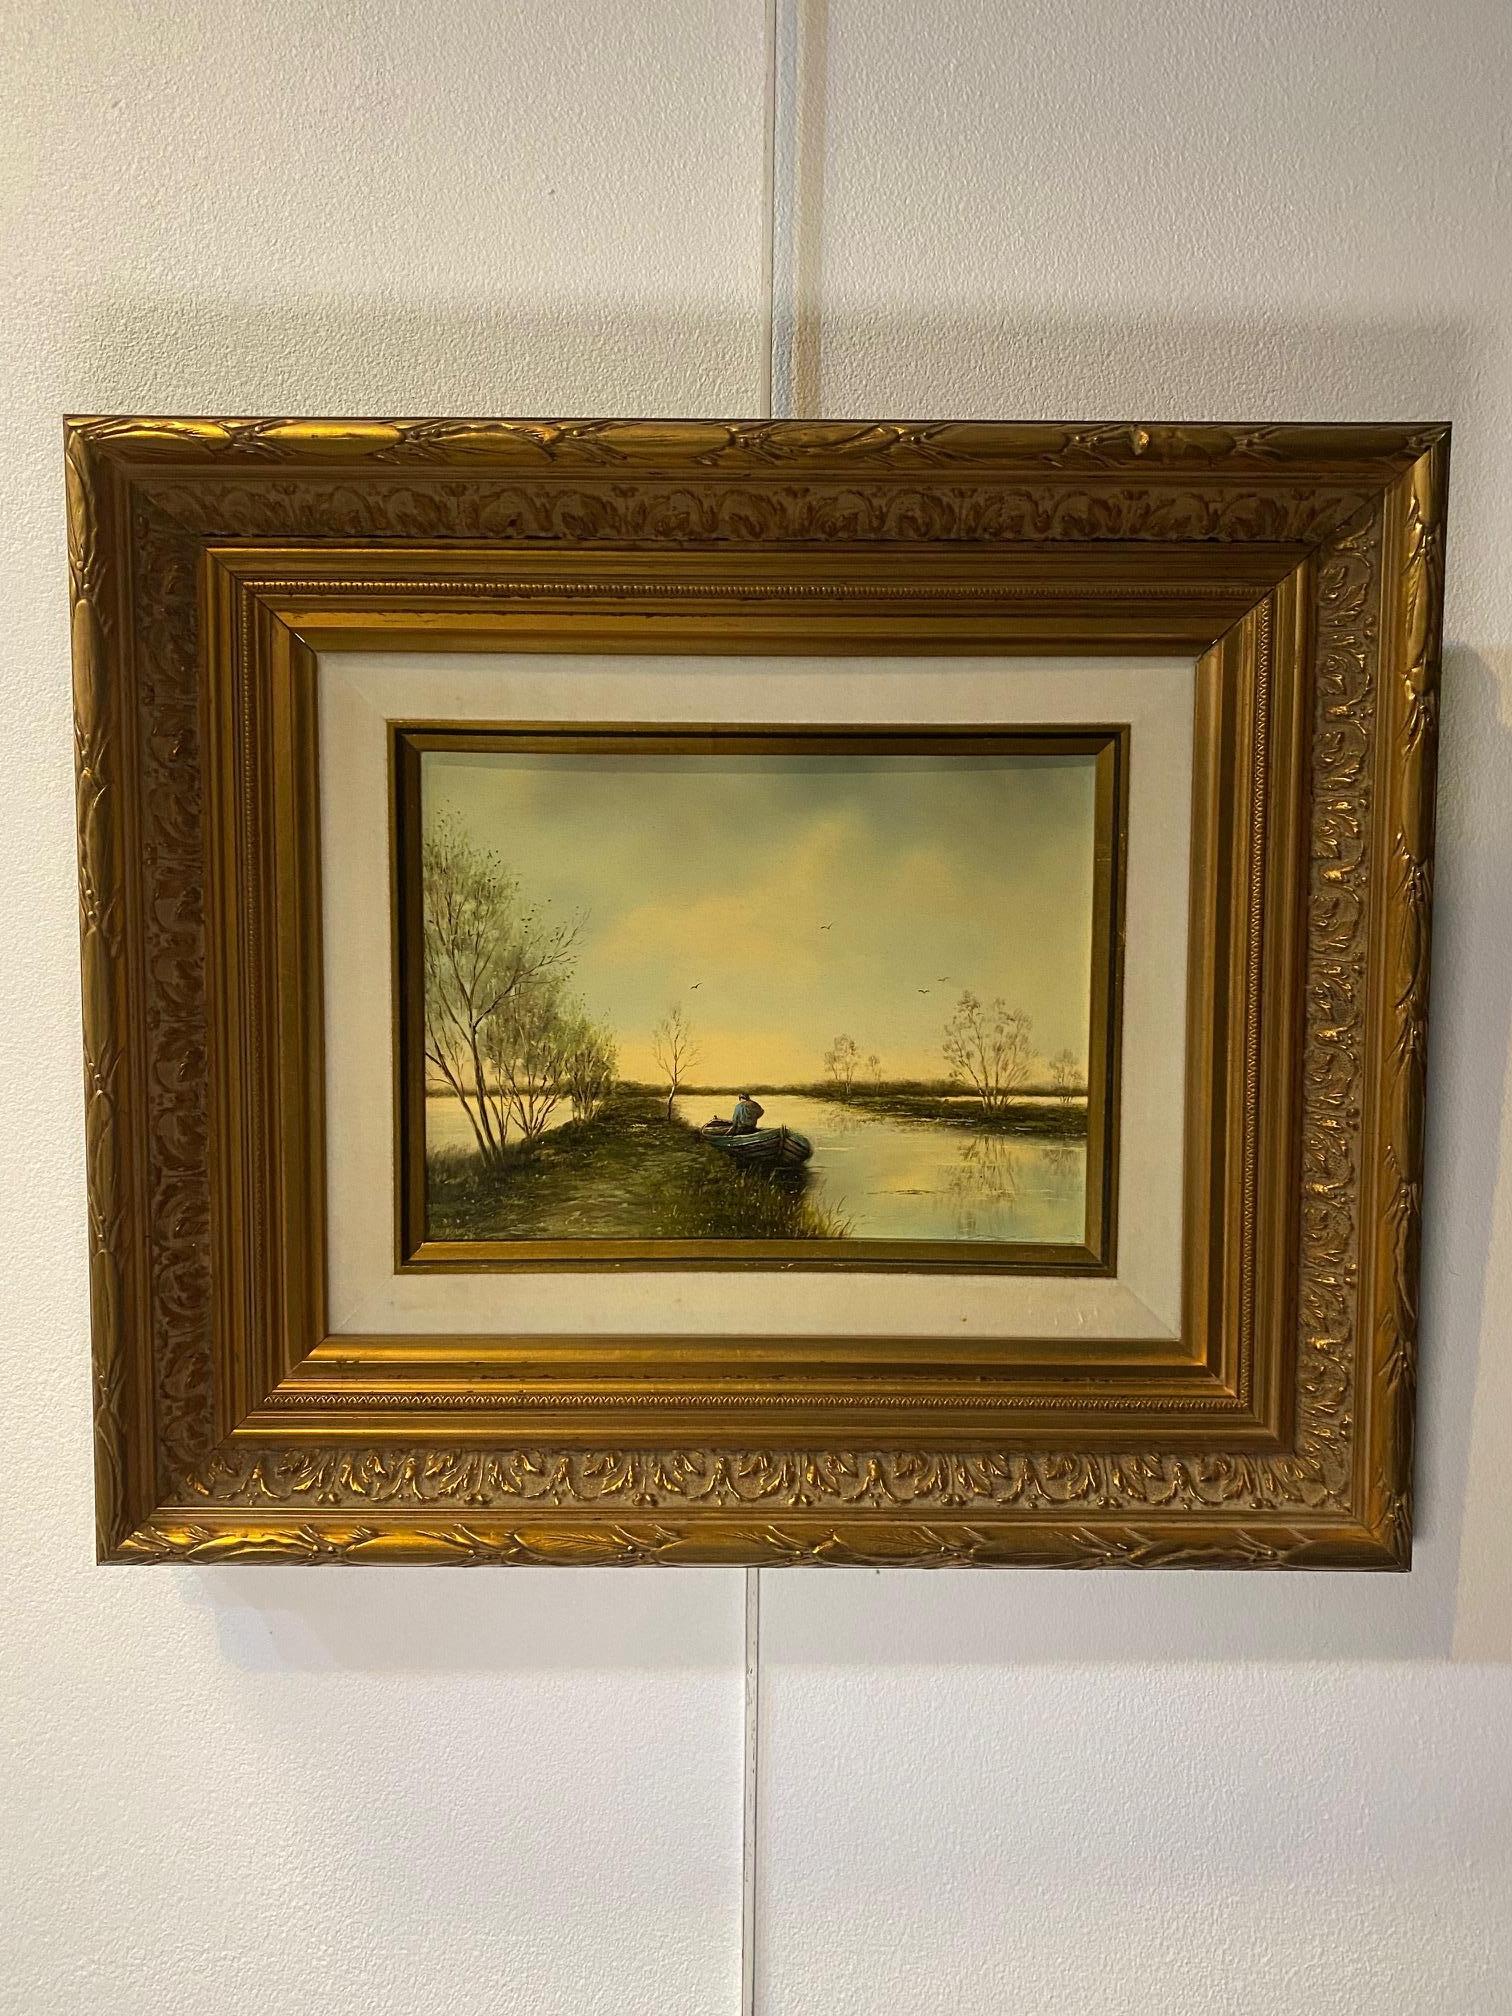 Oil on wood sold with frame 
Total size with frame 43x37 cm

Breedveld was born in 1921. in Spaarnewoude (Holland)
A self-made art painter. Painted mainly on panel sizes 18x24 and 30x40 cm. After 13 different trades and lot of accidents, he became